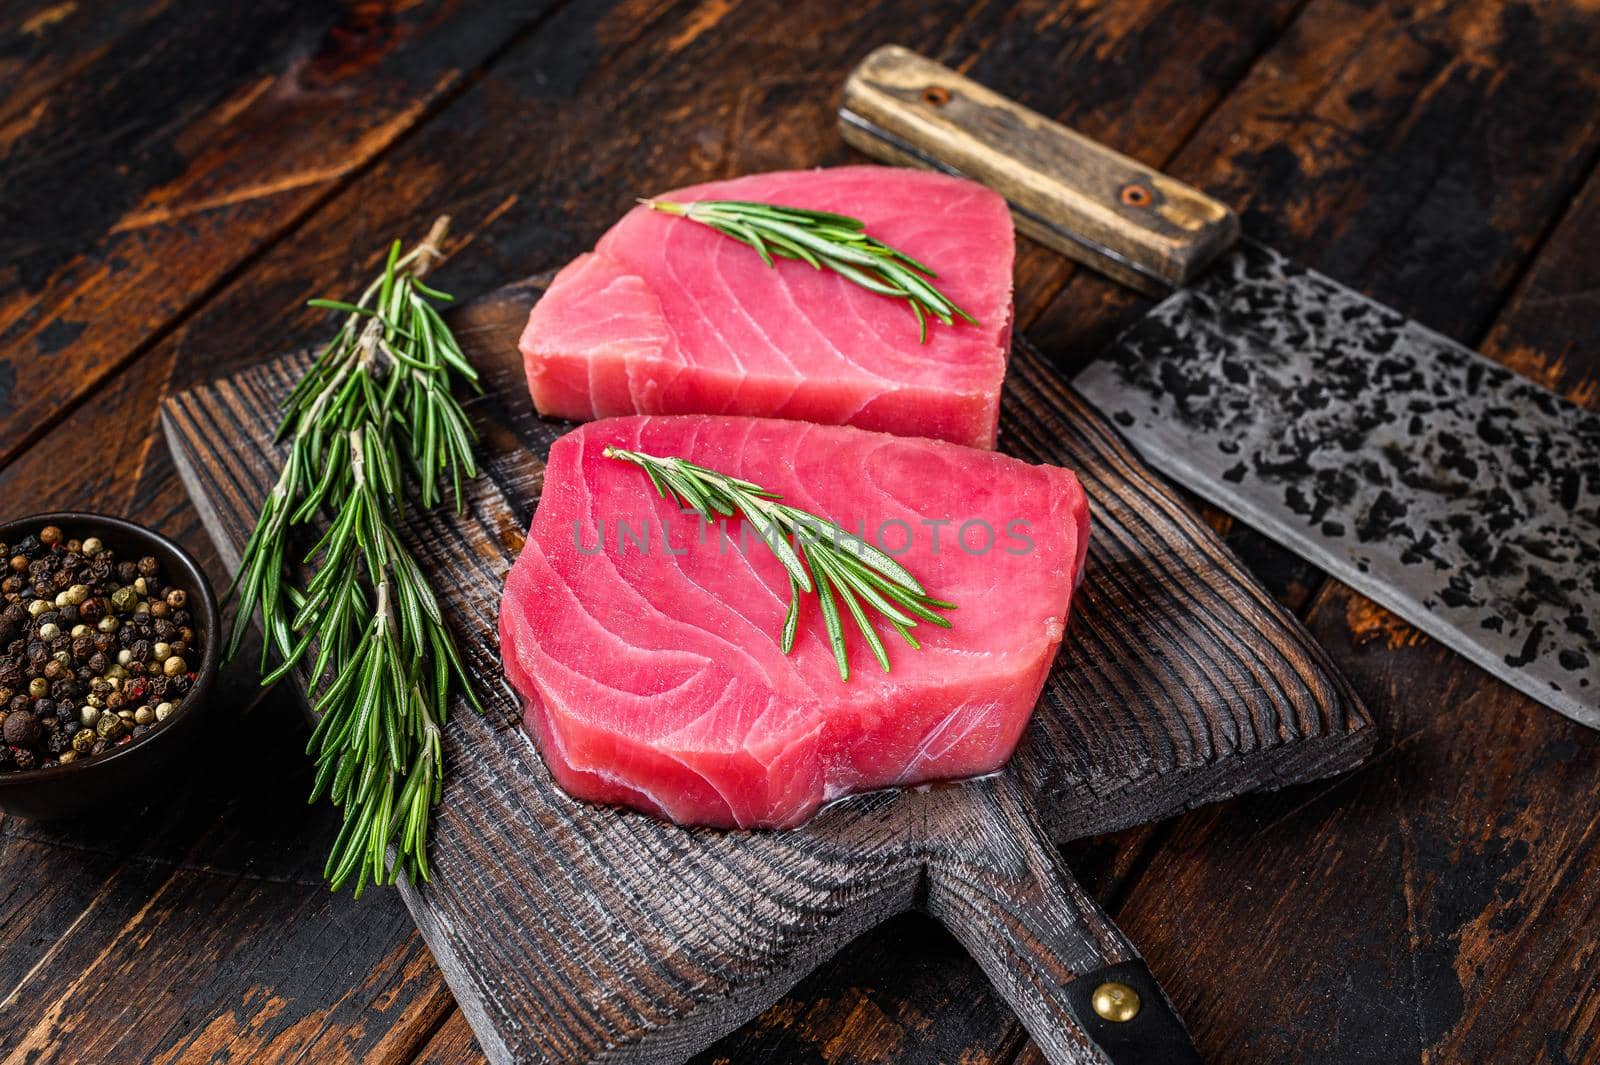 Raw tuna steaks on a wooden cutting Board with cleaver. Dark wooden background. Top view.